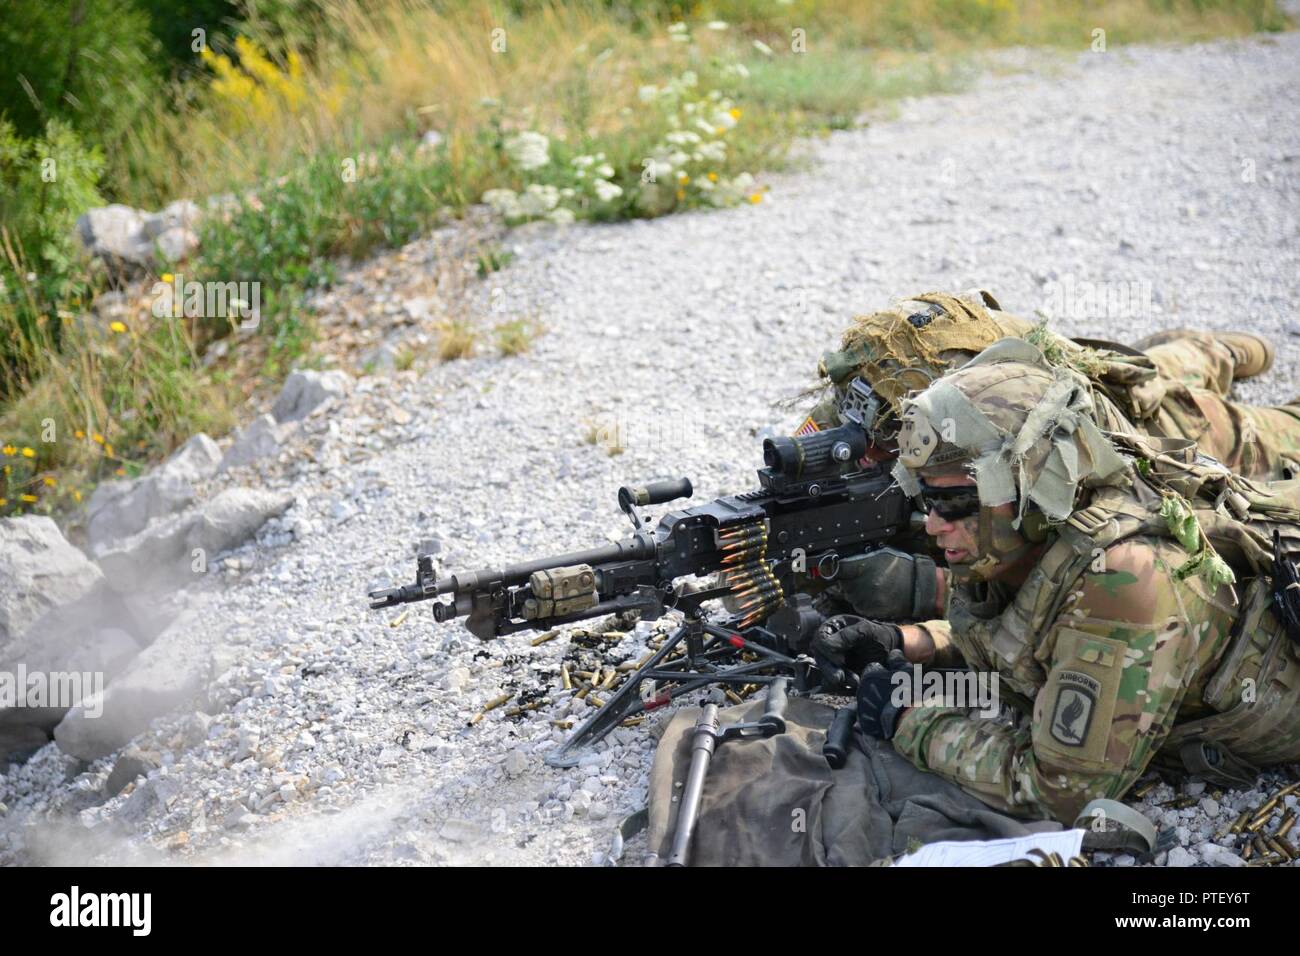 A U.S. Army Paratrooper assigned to 2nd Battalion, 503rd Infantry Regiment, 173rd Airborne Brigade, engages target during a live-fire exercise as part of Exercise Rock Knight at Pocek Range in Postonja, Slovenia, July 19, 2017. Exercise Rock Knight is a bilateral training exercise between the U.S. Army 173rd Airborne Brigade and the Slovenian Armed Forces, focused on small-unit tactics and building on previous lessons learned, forging the bonds and enhancing readiness between allied forces. The 173rd Airborne Brigade is the U.S. Army's Contingency Response Force in Europe, providing rapidly-de Stock Photo